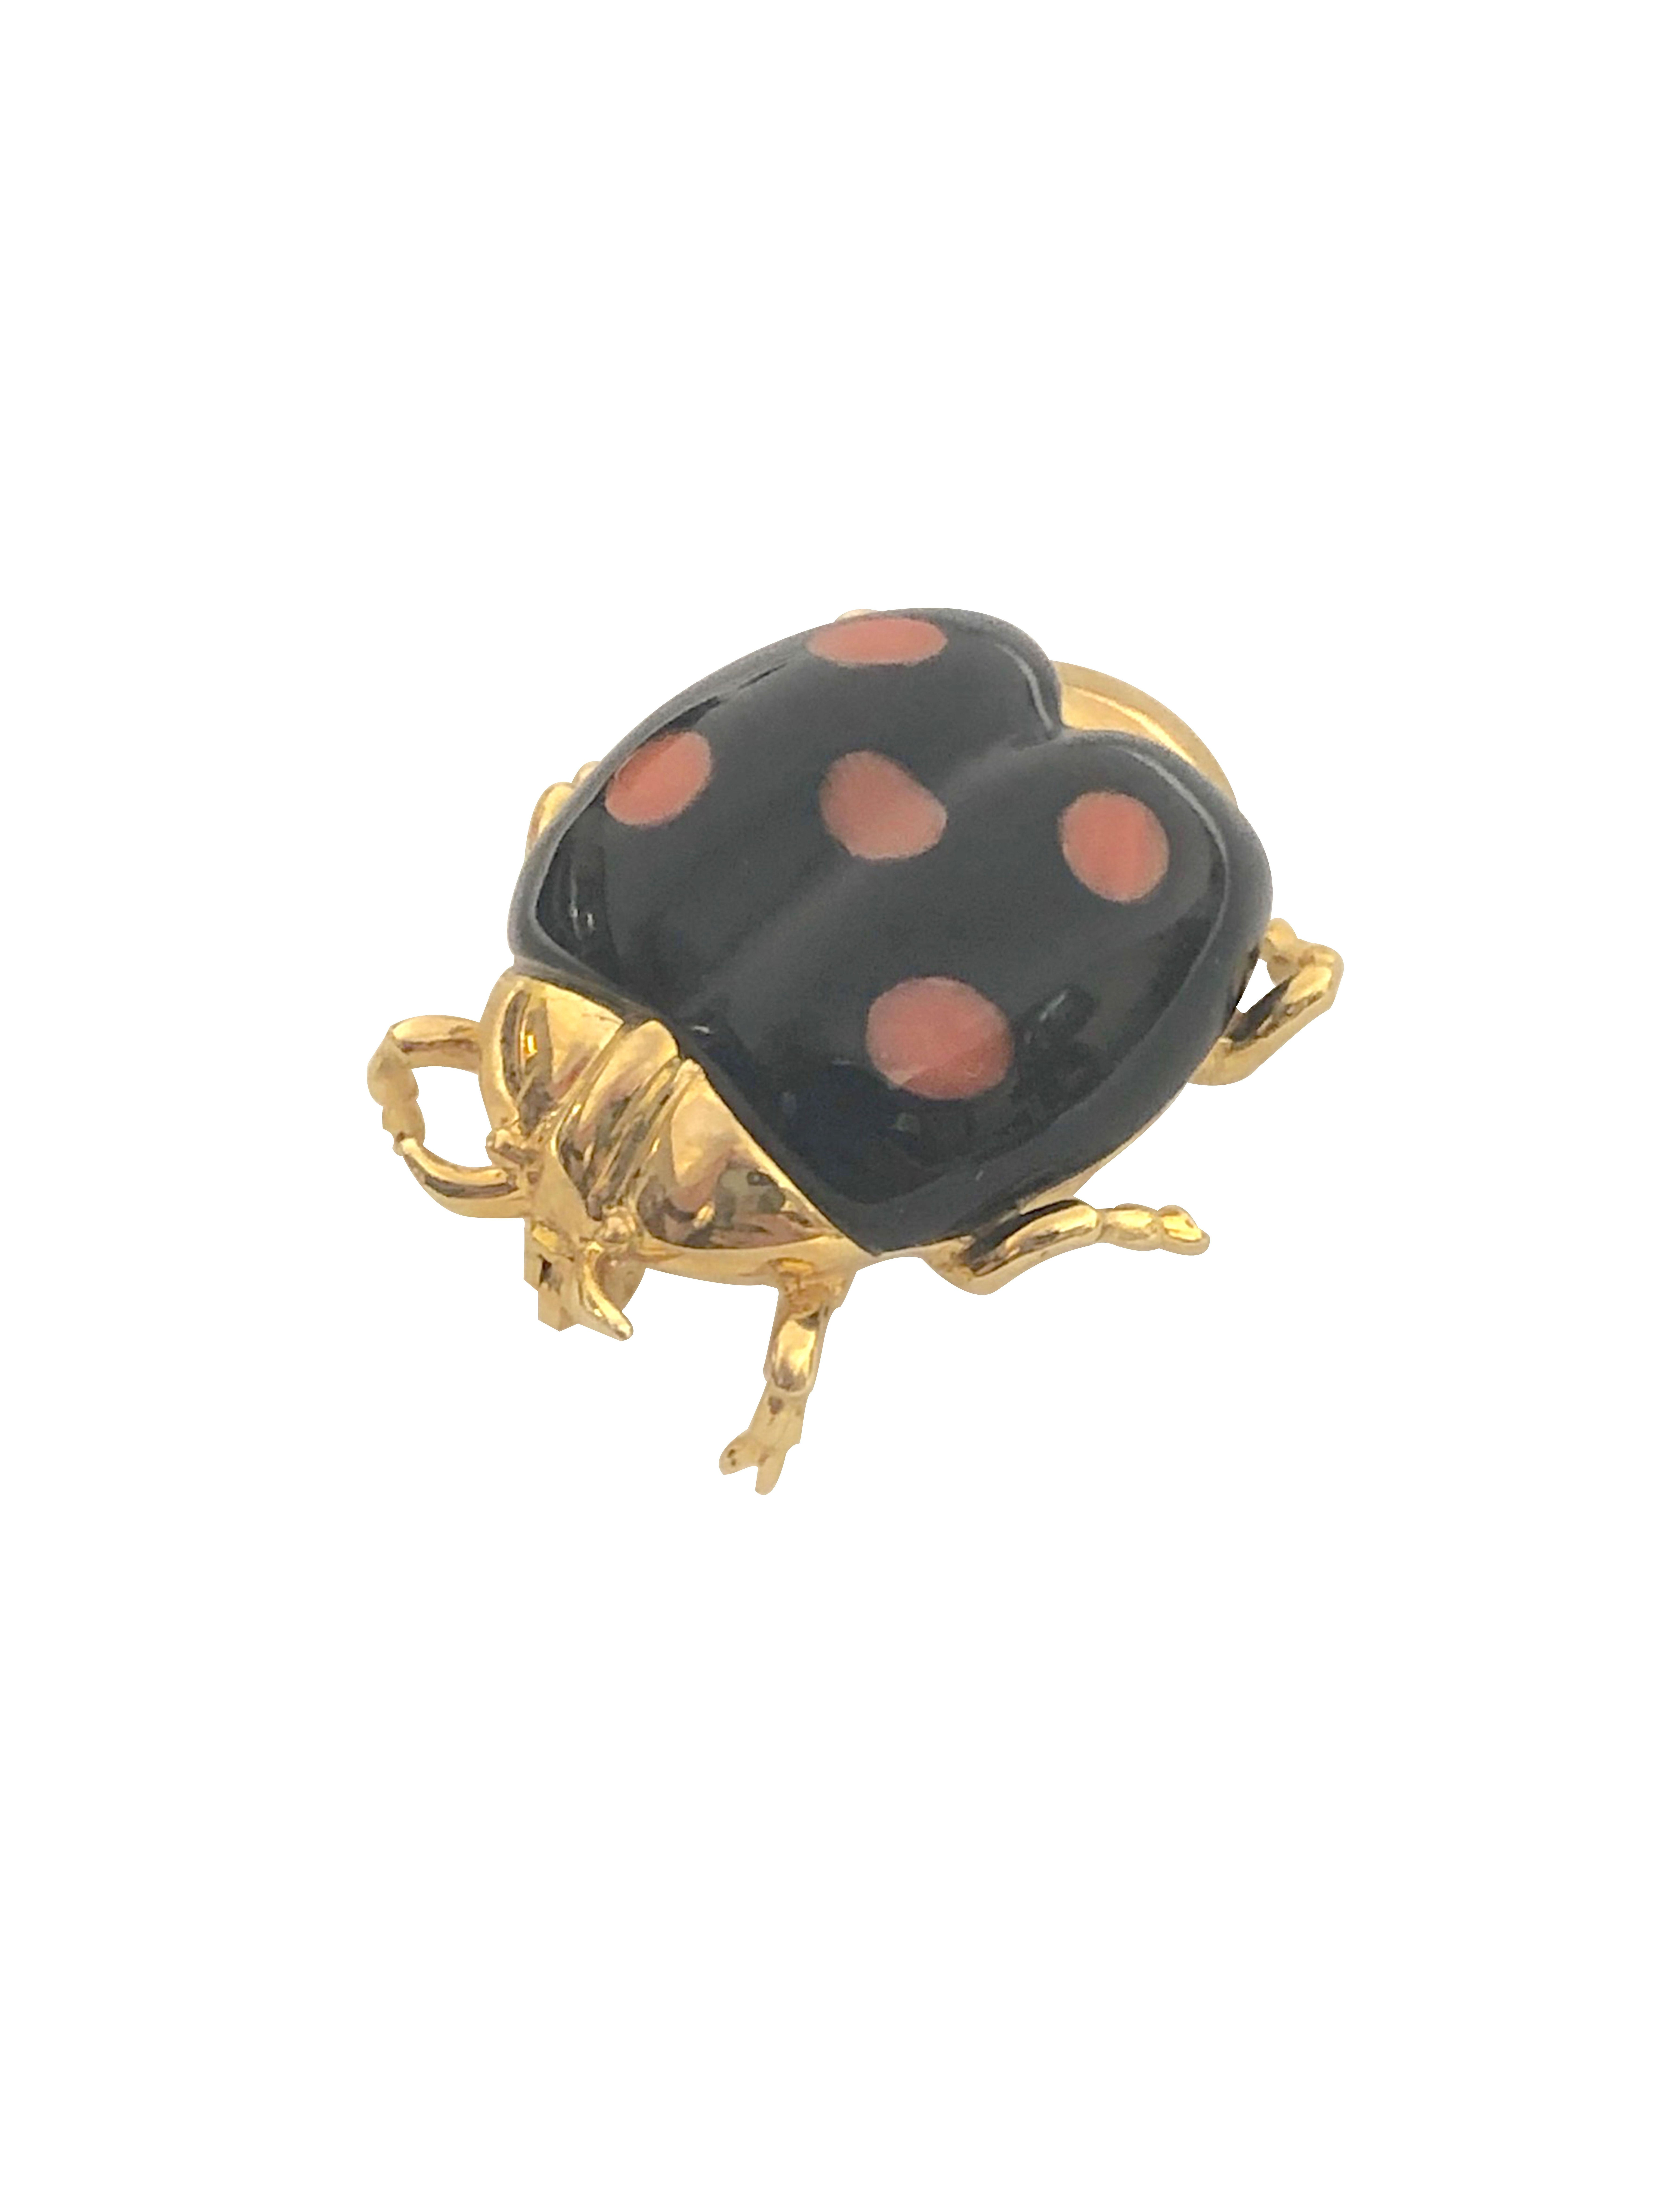 Circa 2000 Asche Grossbardt 14K Yellow Gold Beetle Brooches, each measures 1 inch in length and 3/4 inch wide, set with Diamonds and masterfully inlayed with Coral, Onyx, Mother of Pearl Lapis and Malachite. 